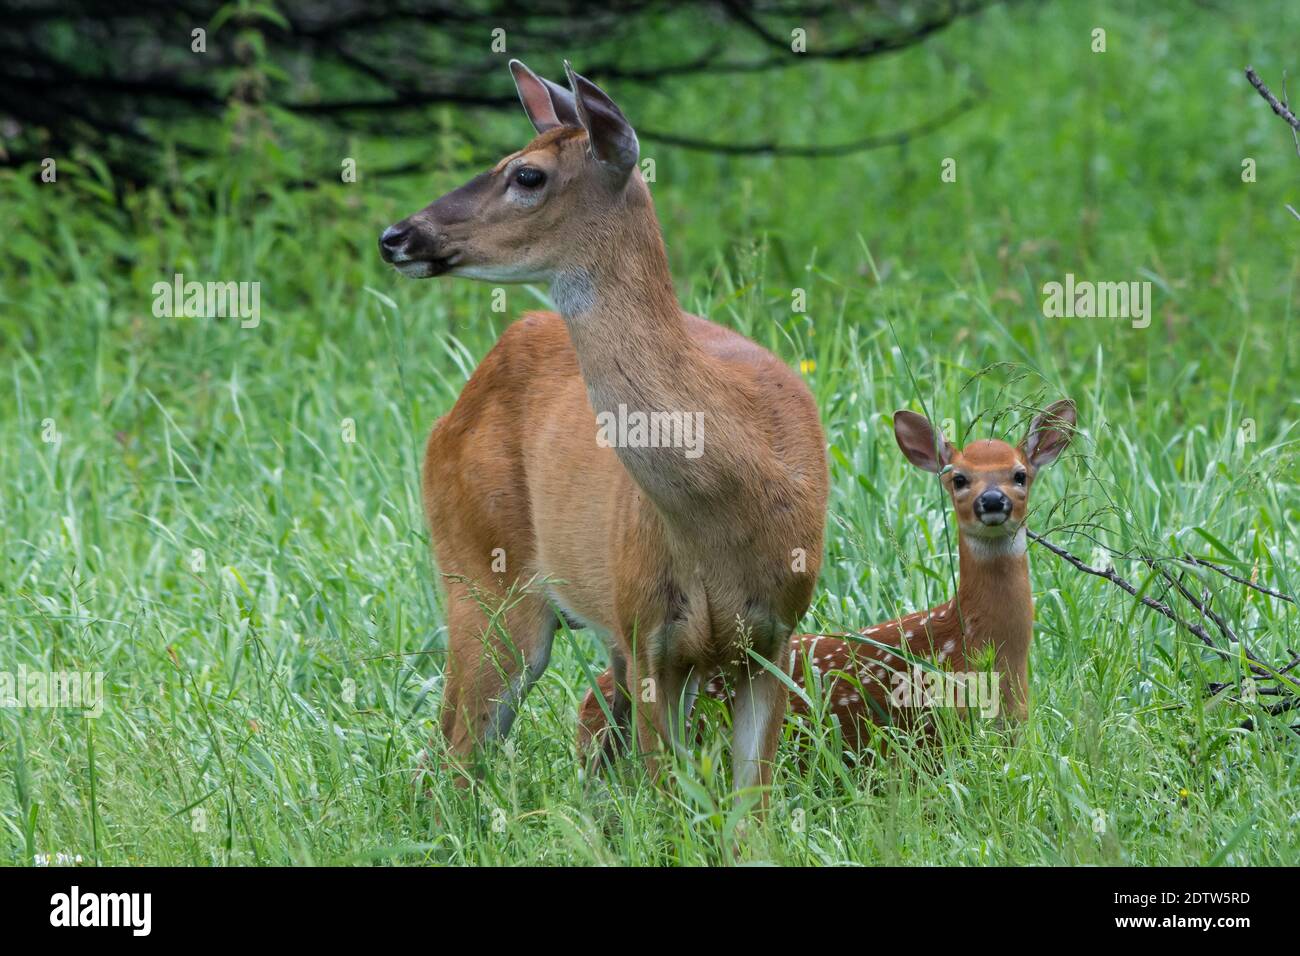 A mother doe deer keeps careful watch over her new baby fawn. Stock Photo